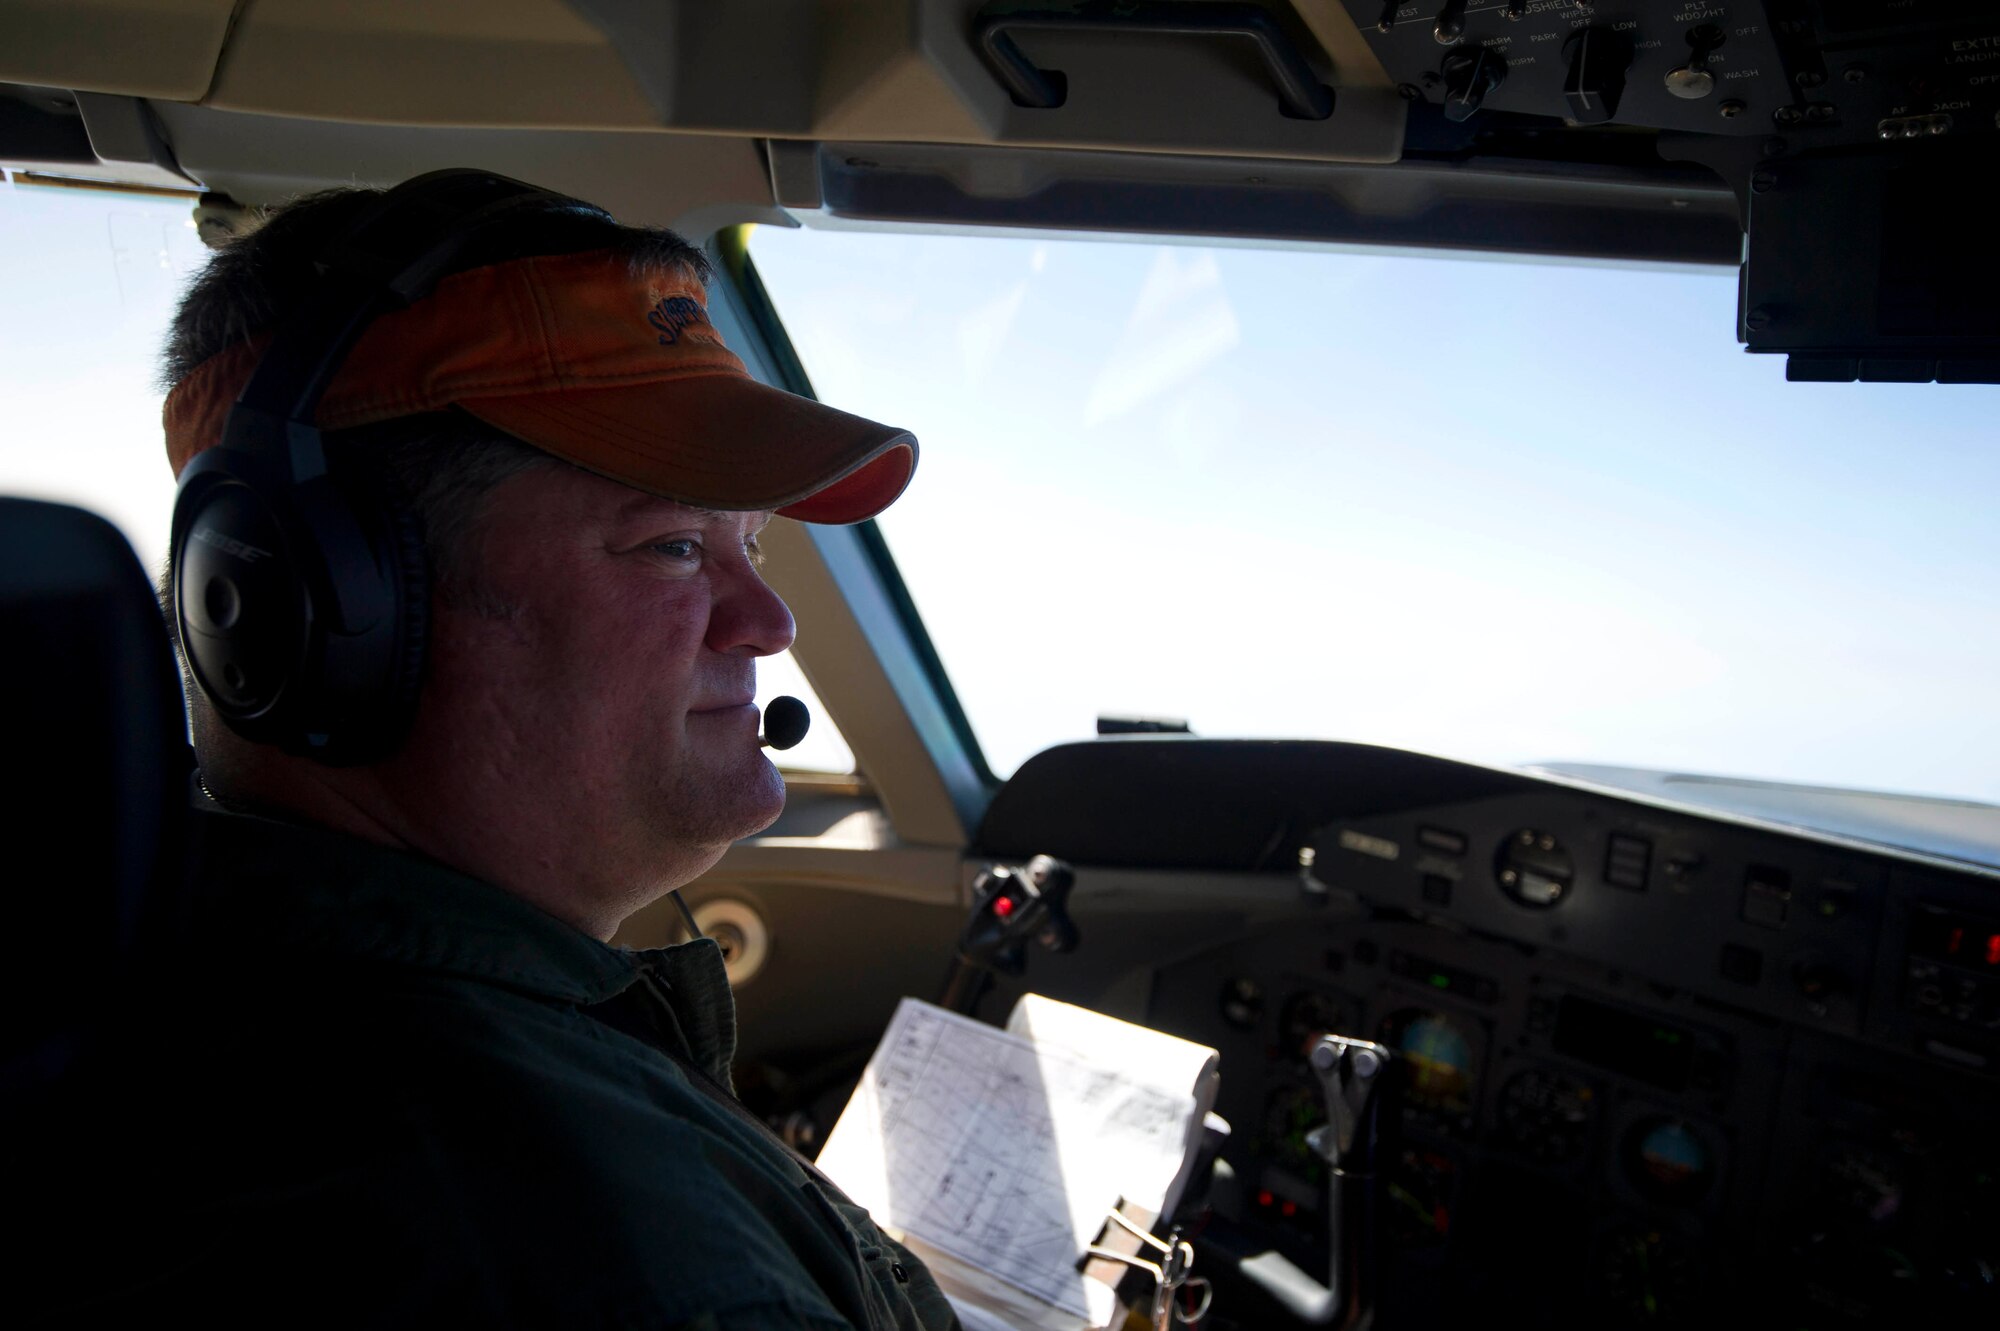 Garry Acree, 82nd Aerial Target Squadron E-9A Widget pilot, scans the horizon during a mission, May 19, at Tyndall Air Force Base. Some of the roles performed by the aircraft include sea surveillance, telemetry and radio relay. (U.S. Air Force photo by Senior Airman Dustin Mullen/Released)